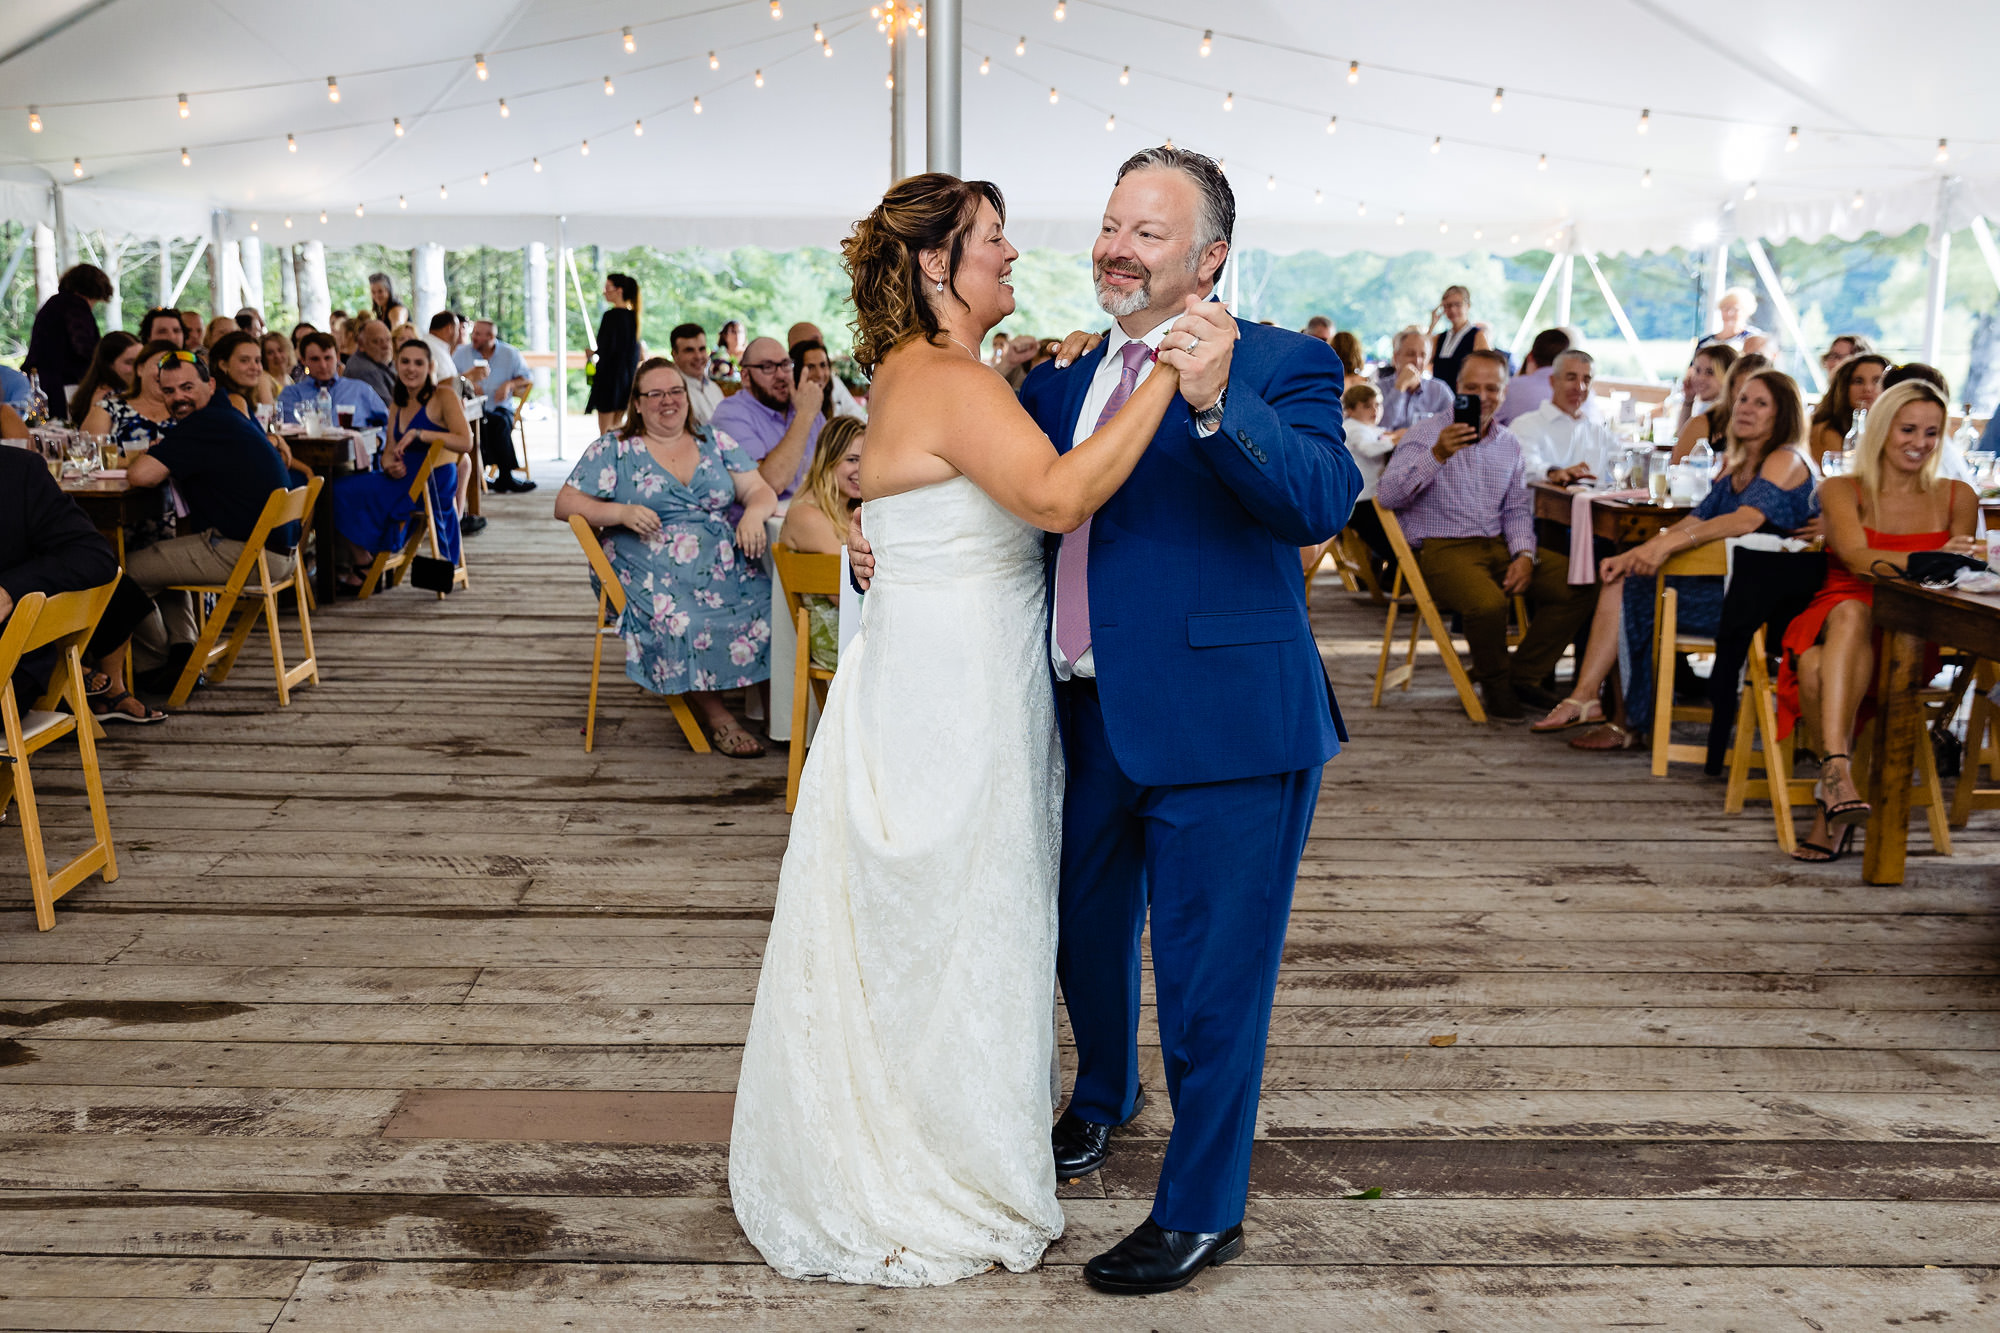 A first dance at a mountain wedding in Maine